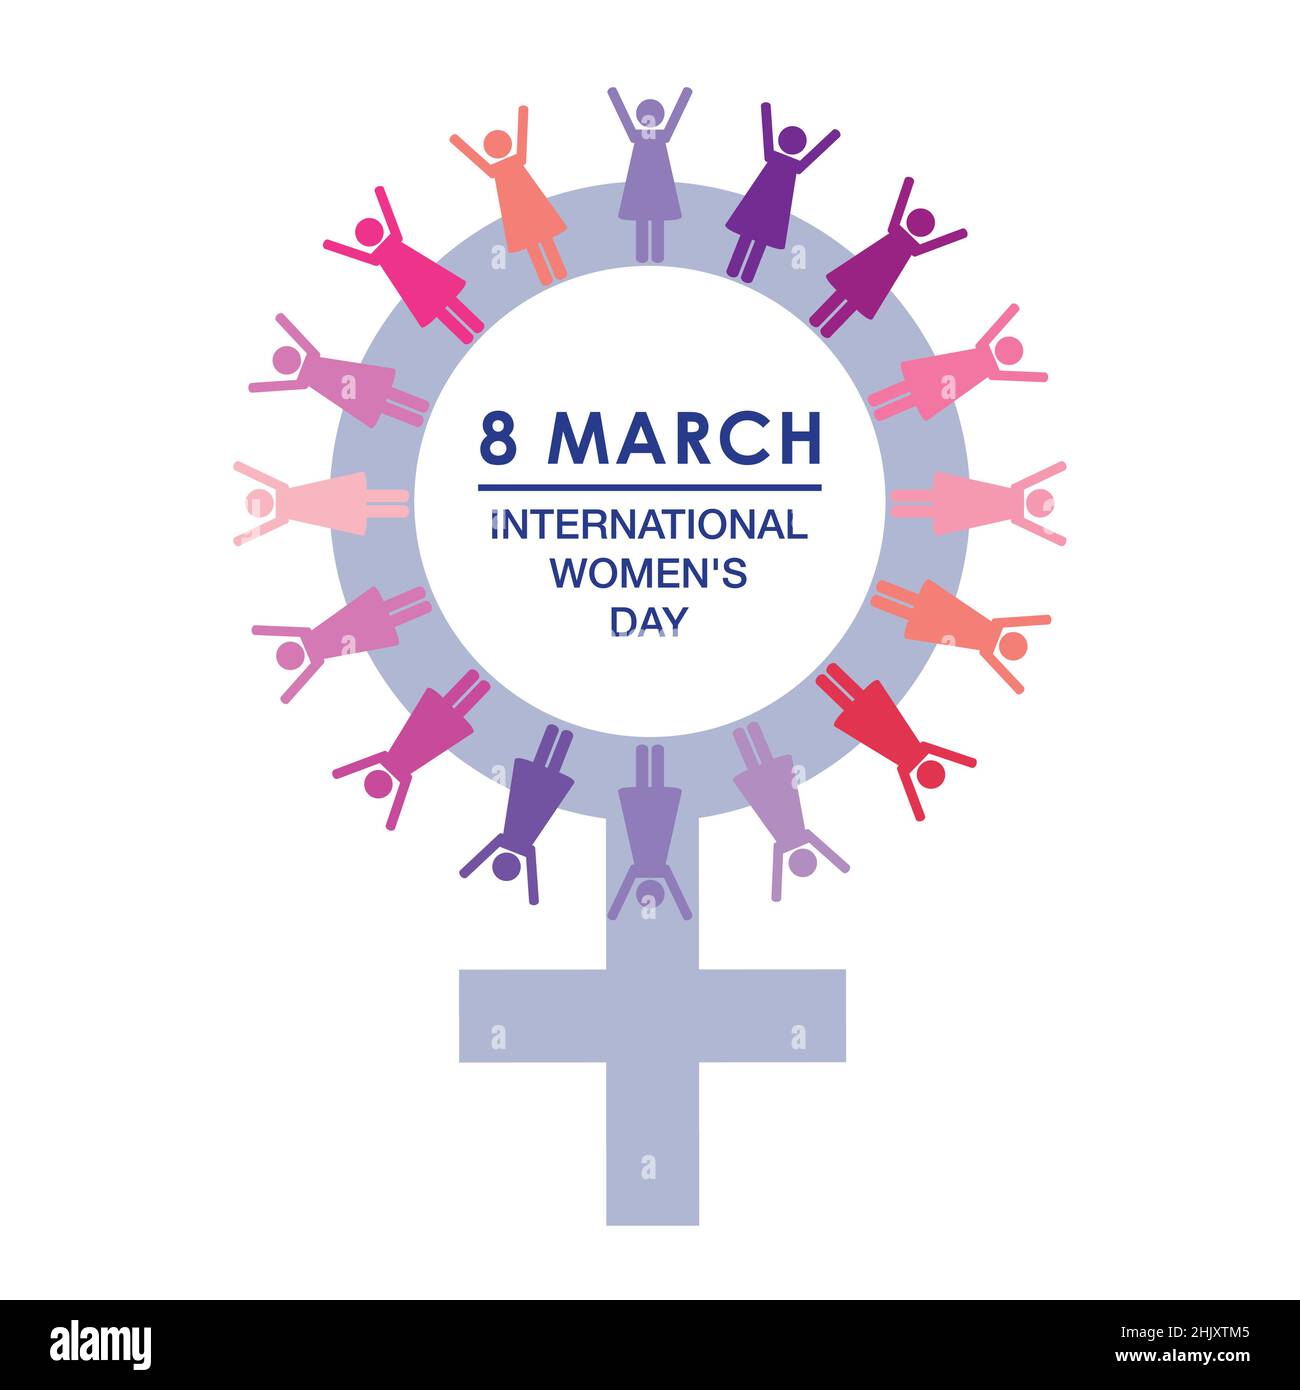 8th march international womans day symbol pictogram Stock Vector